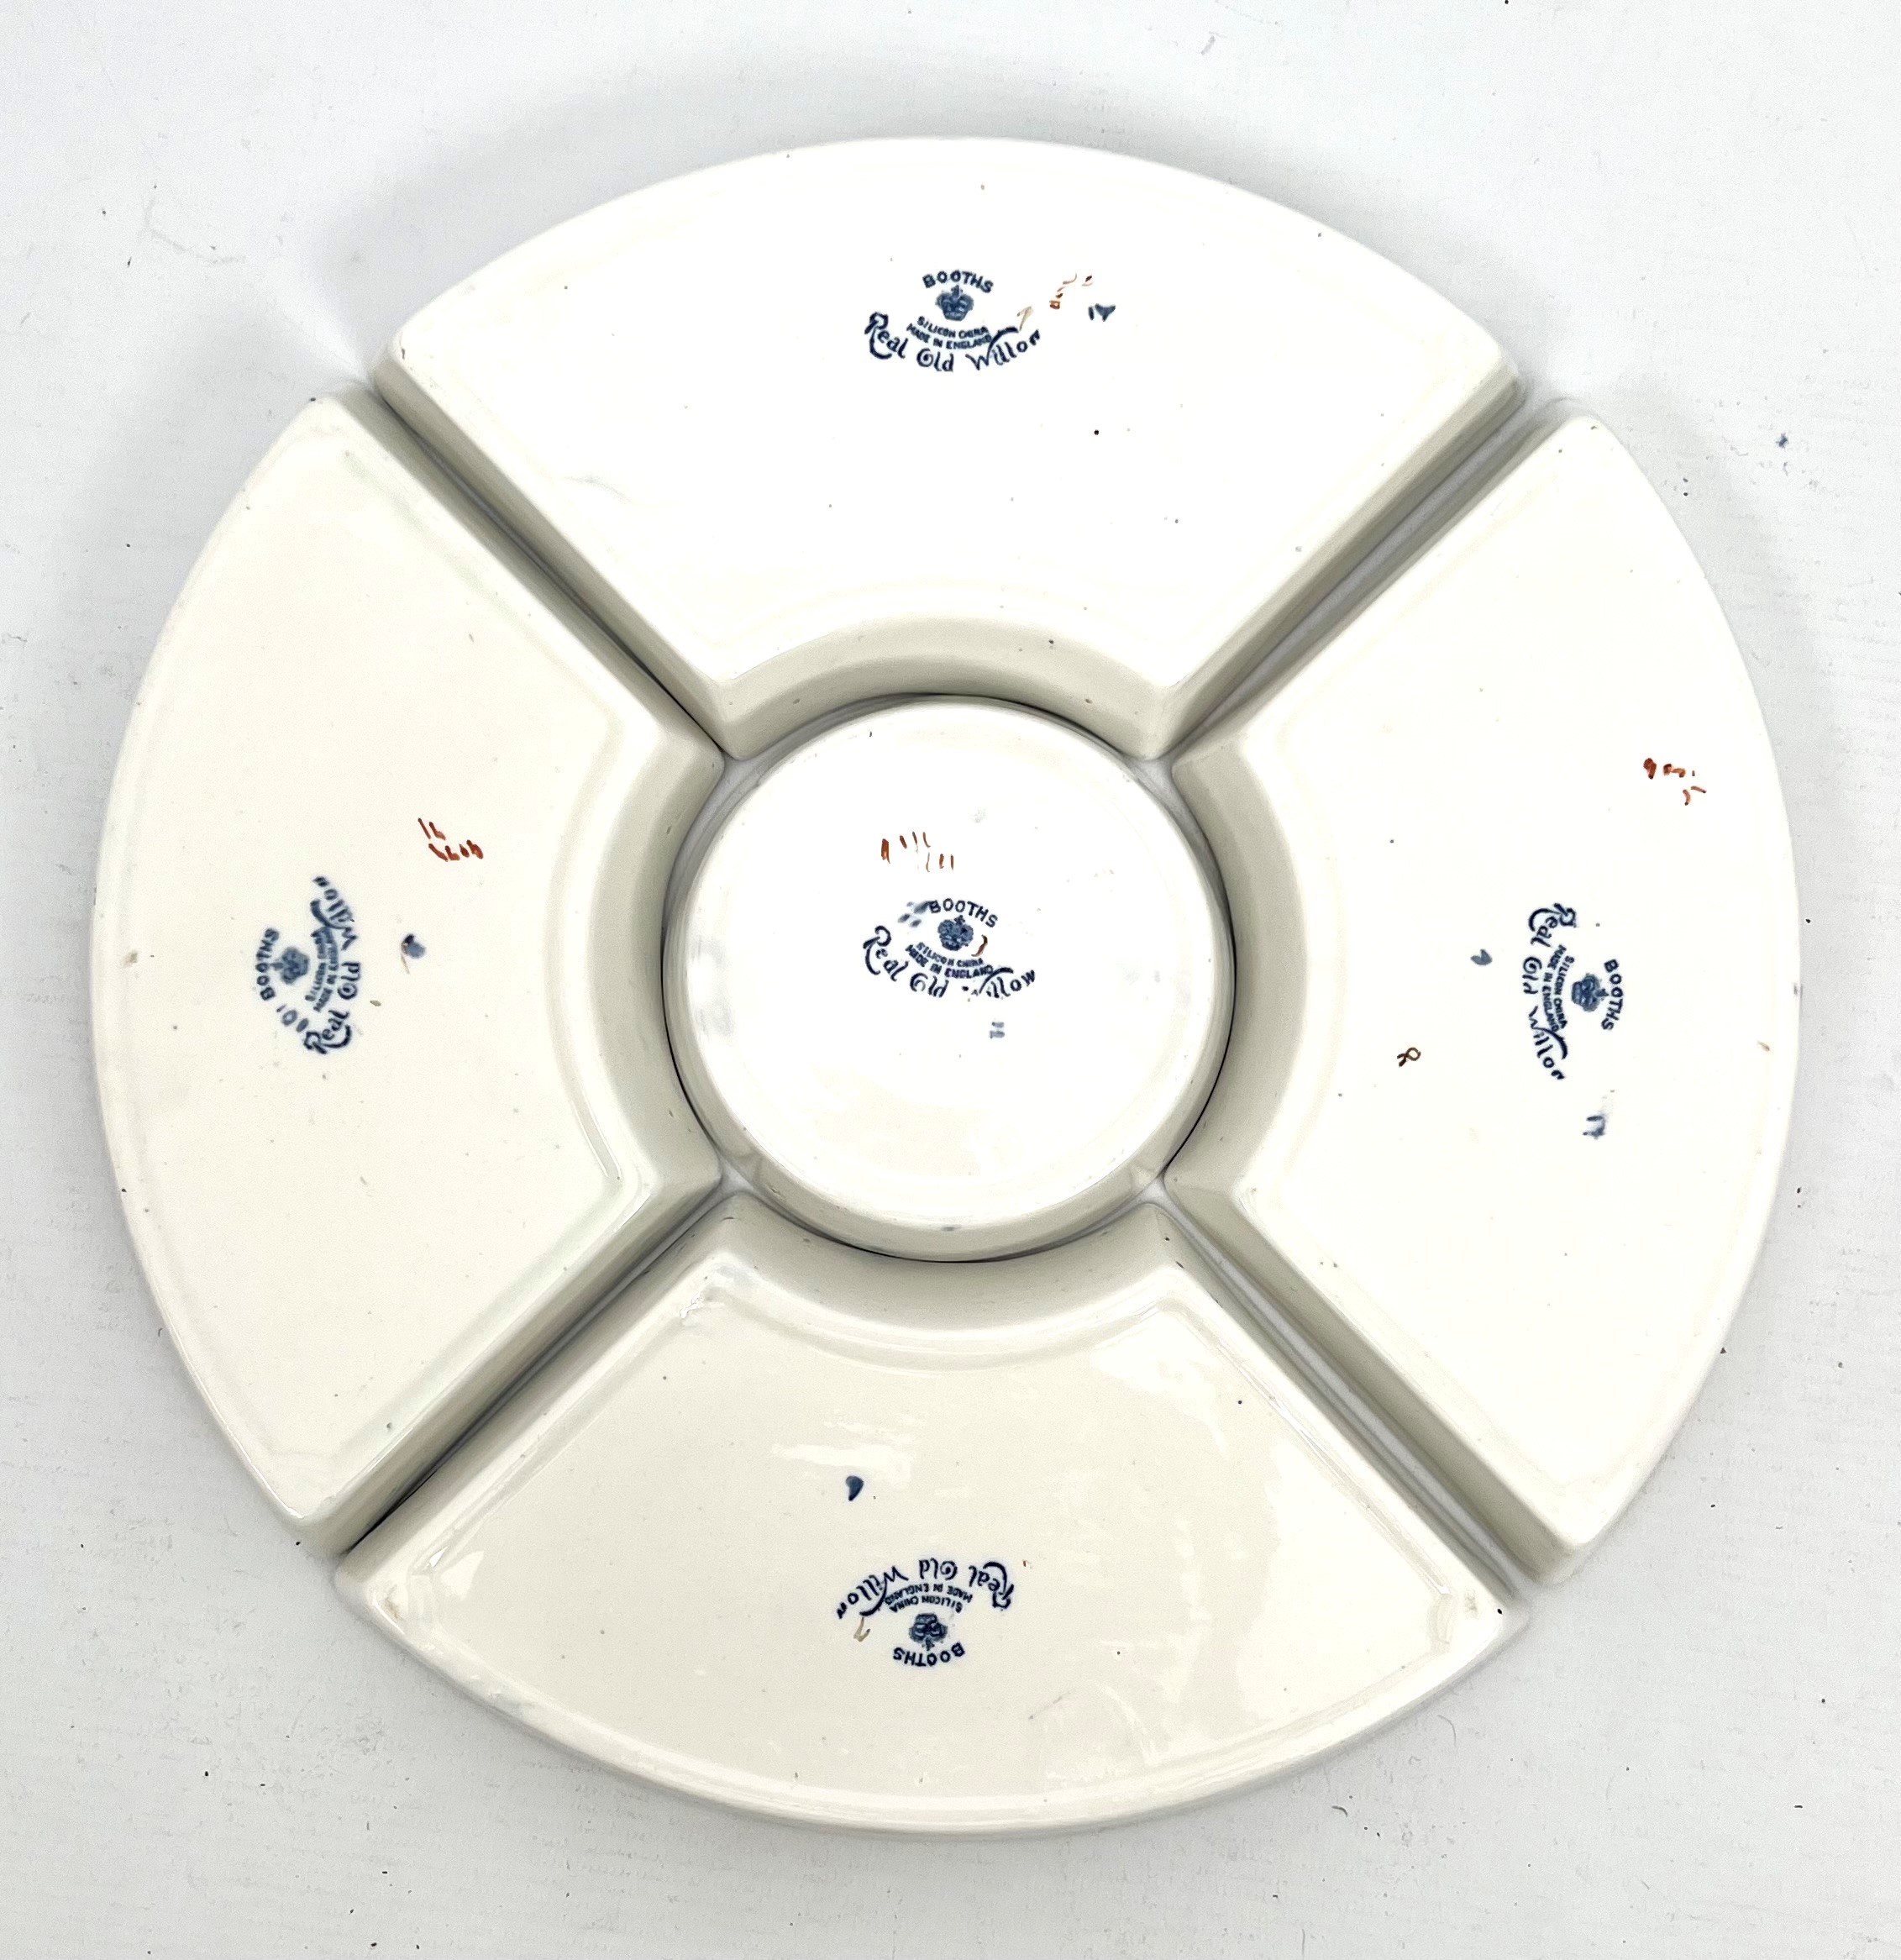 A Booths Real Old Willow pattern china five-part supper dish - early to mid-20th century, printed - Image 2 of 3